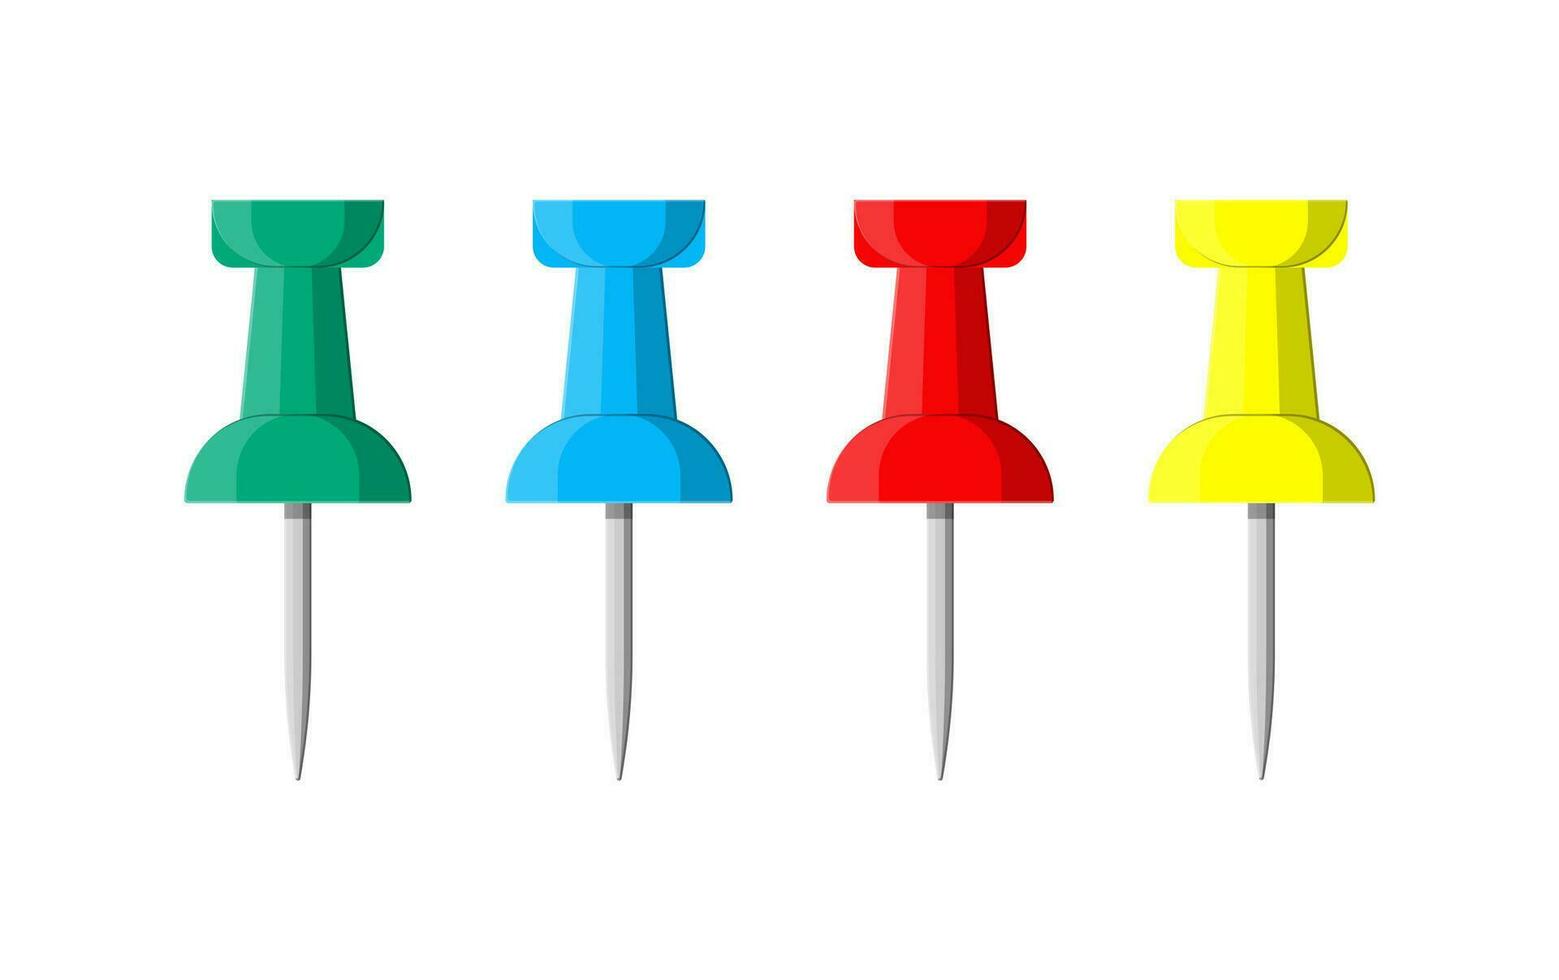 Set of color push pins. Plastic pushpin, thumbtack. Tools for education and work. Stationery and office supply. Vector illustration in flat style